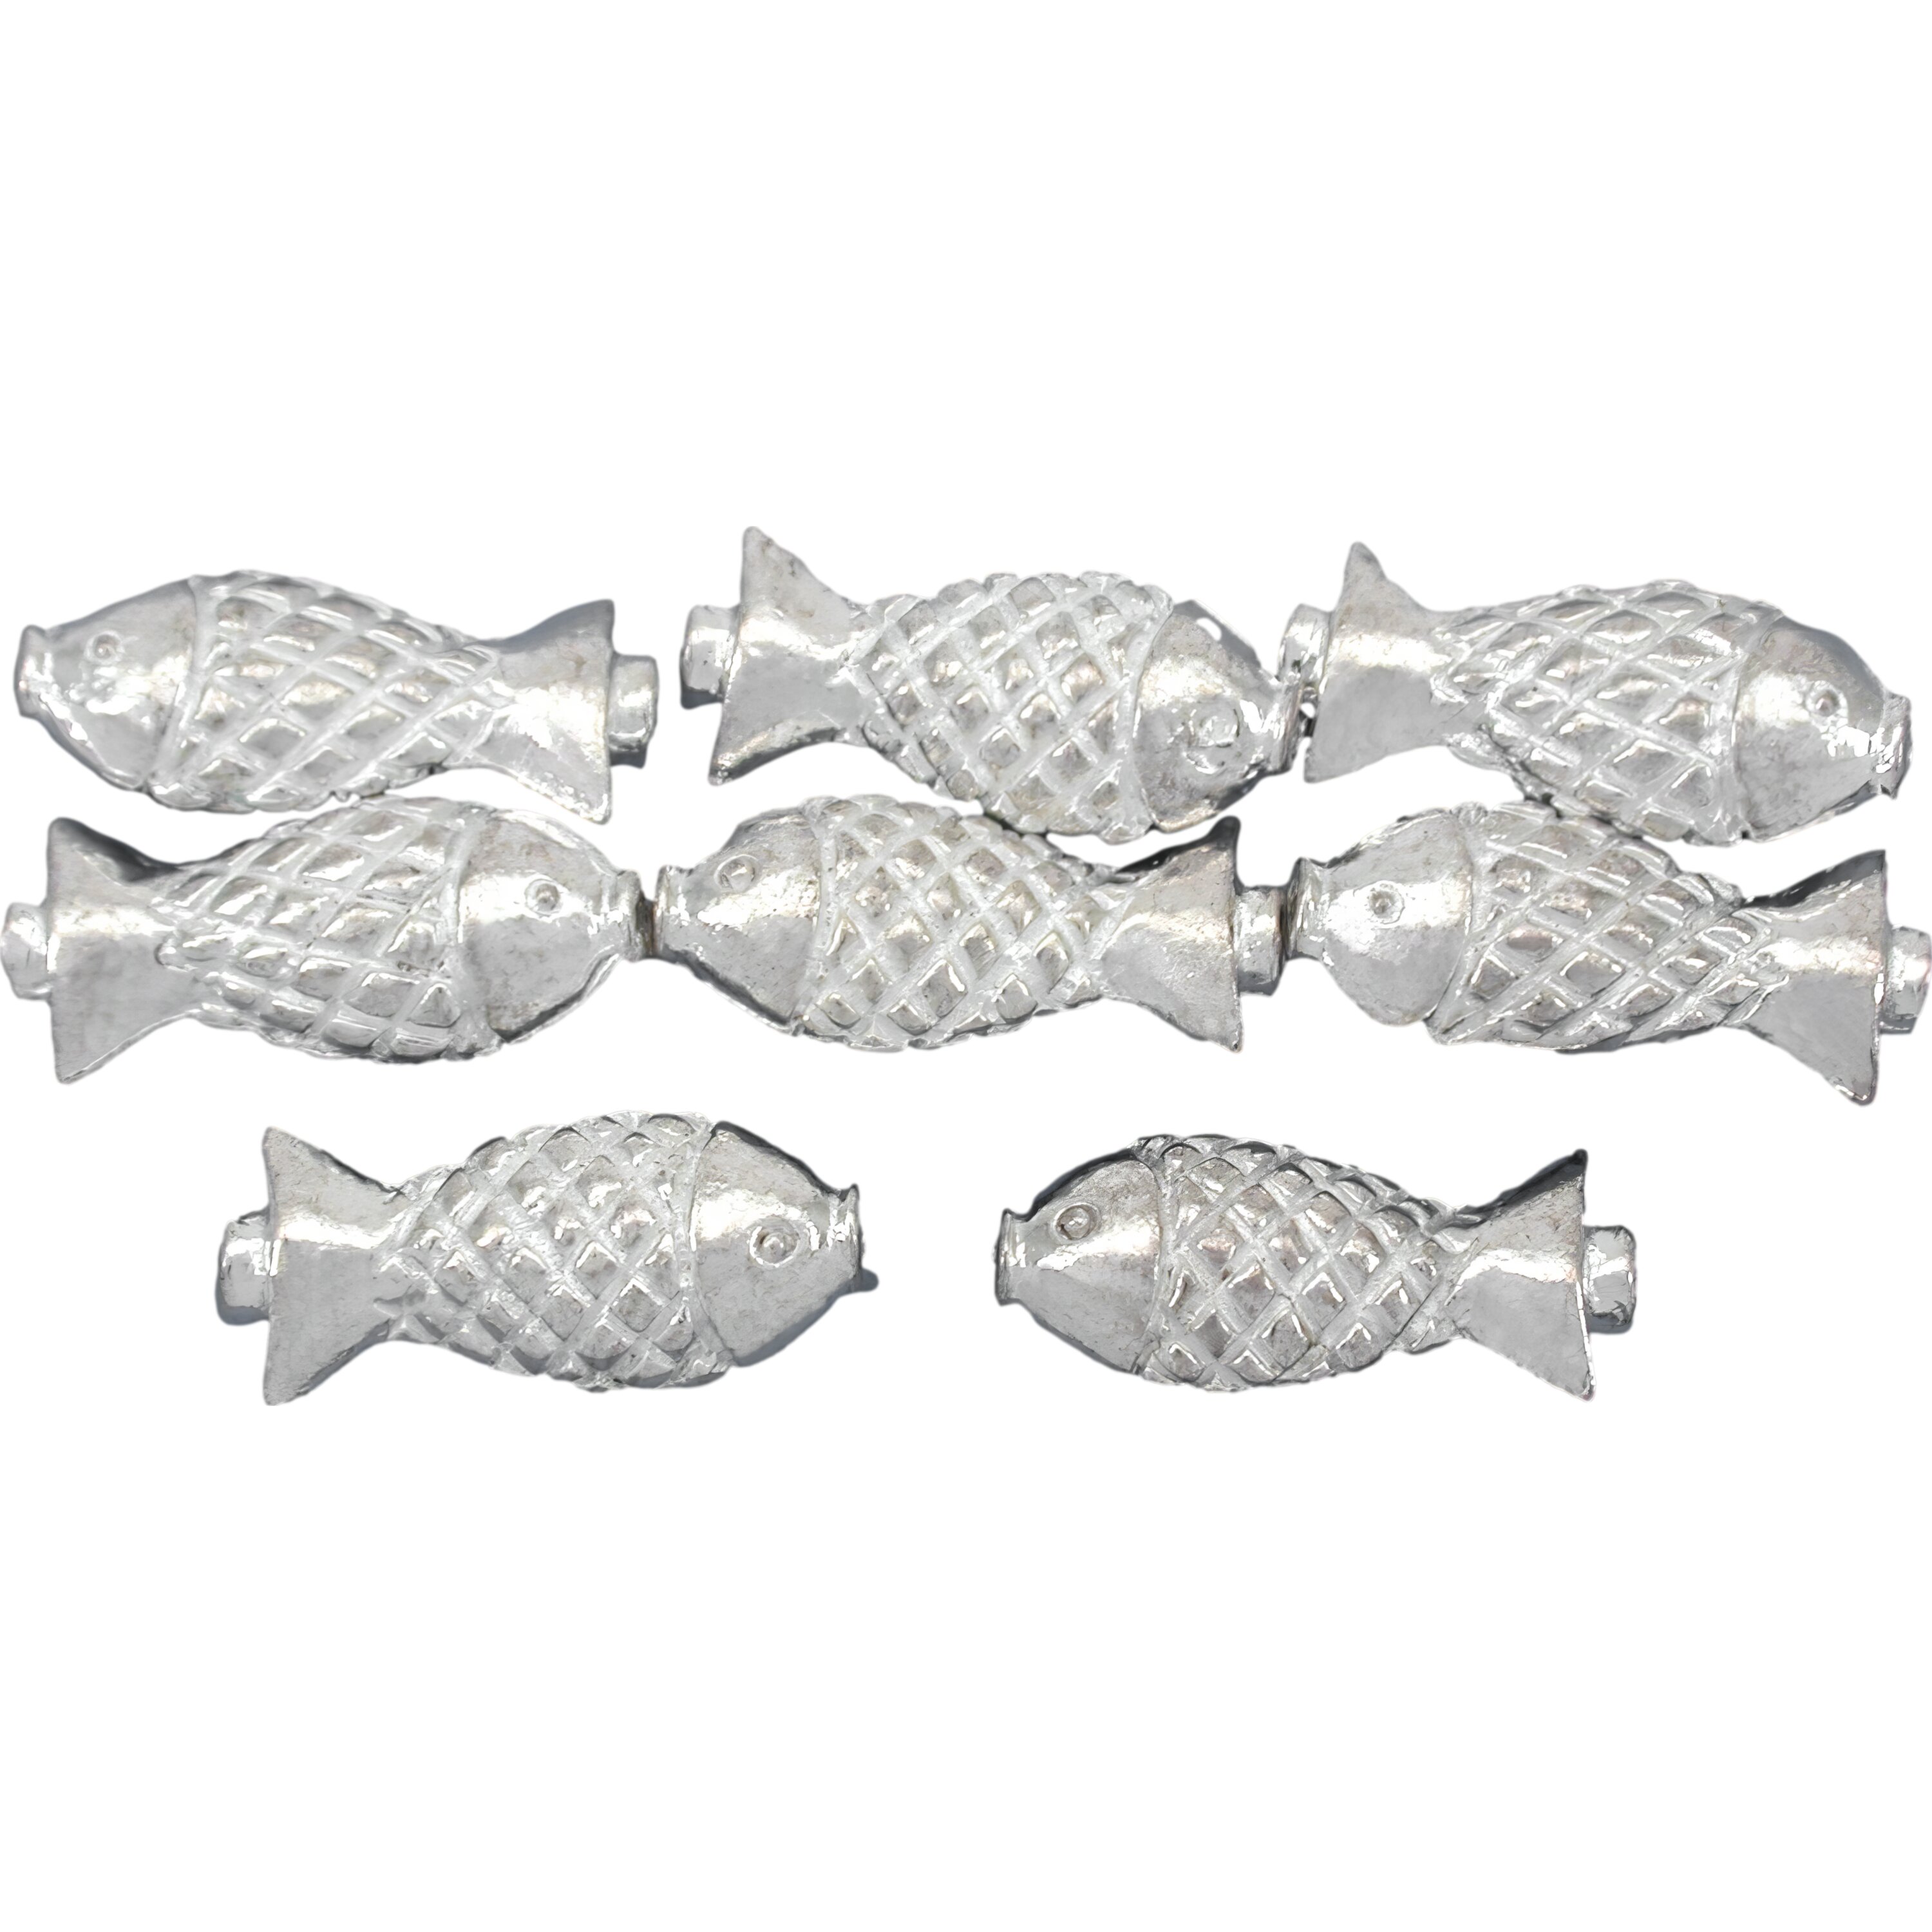 Findingking Fish Beads Silver Plated 18mm 15 Grams